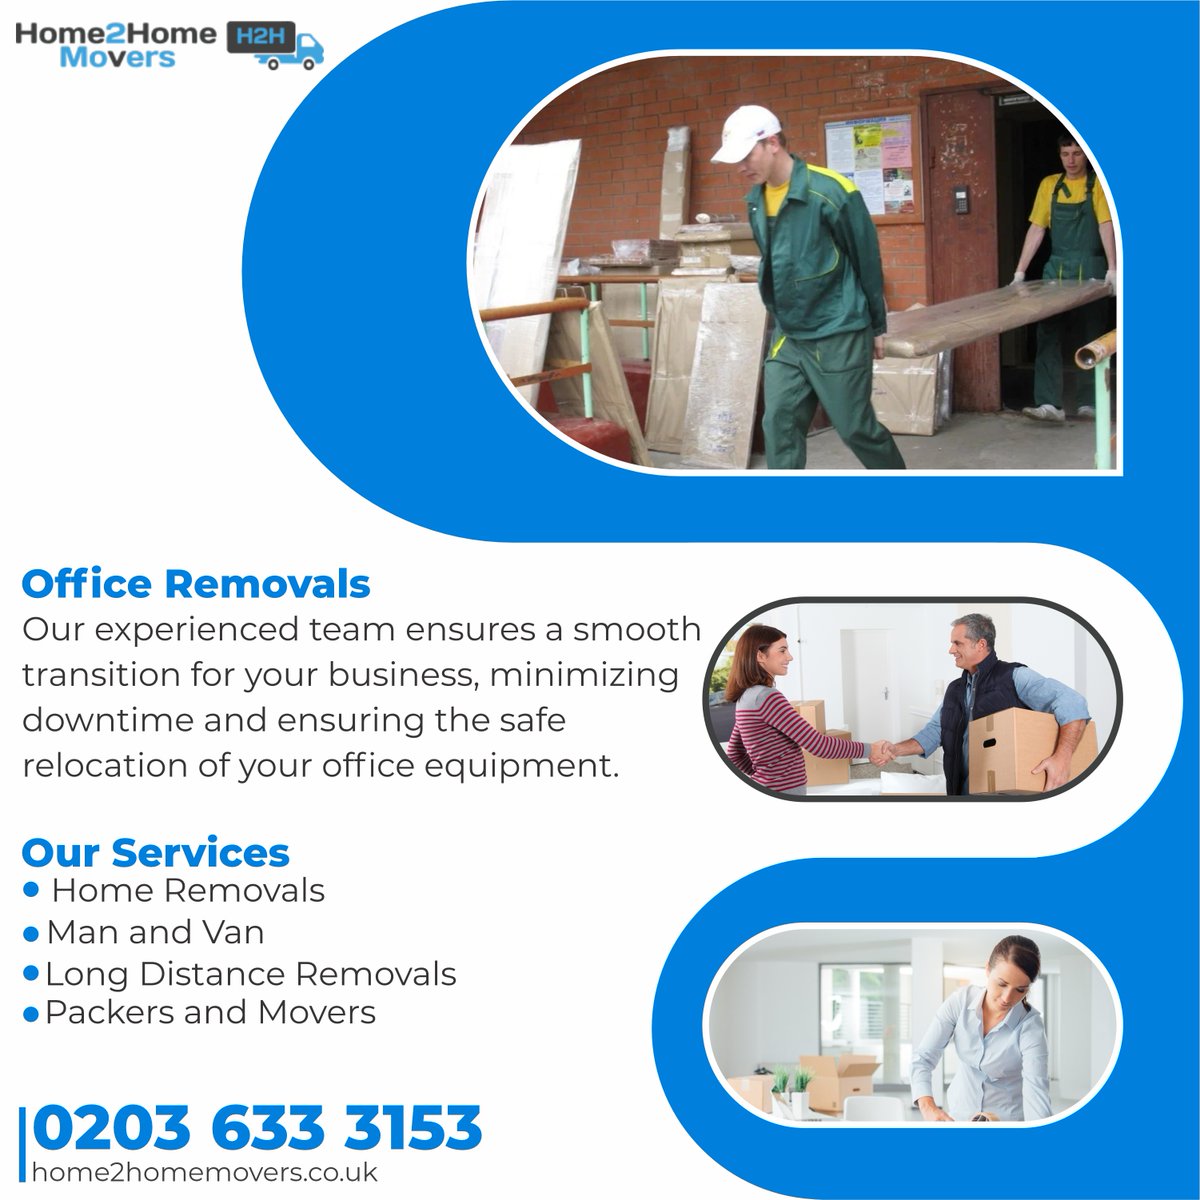 Home 2 Home Movers offers efficient and reliable office removals in London. With our expertise and dedication, we ensure seamless transitions for your business.

home2homemovers.co.uk/office-removal…
#OfficeRemovals
#OfficeRelocation
#BusinessMoving
#CorporateMoves
#OfficeMove